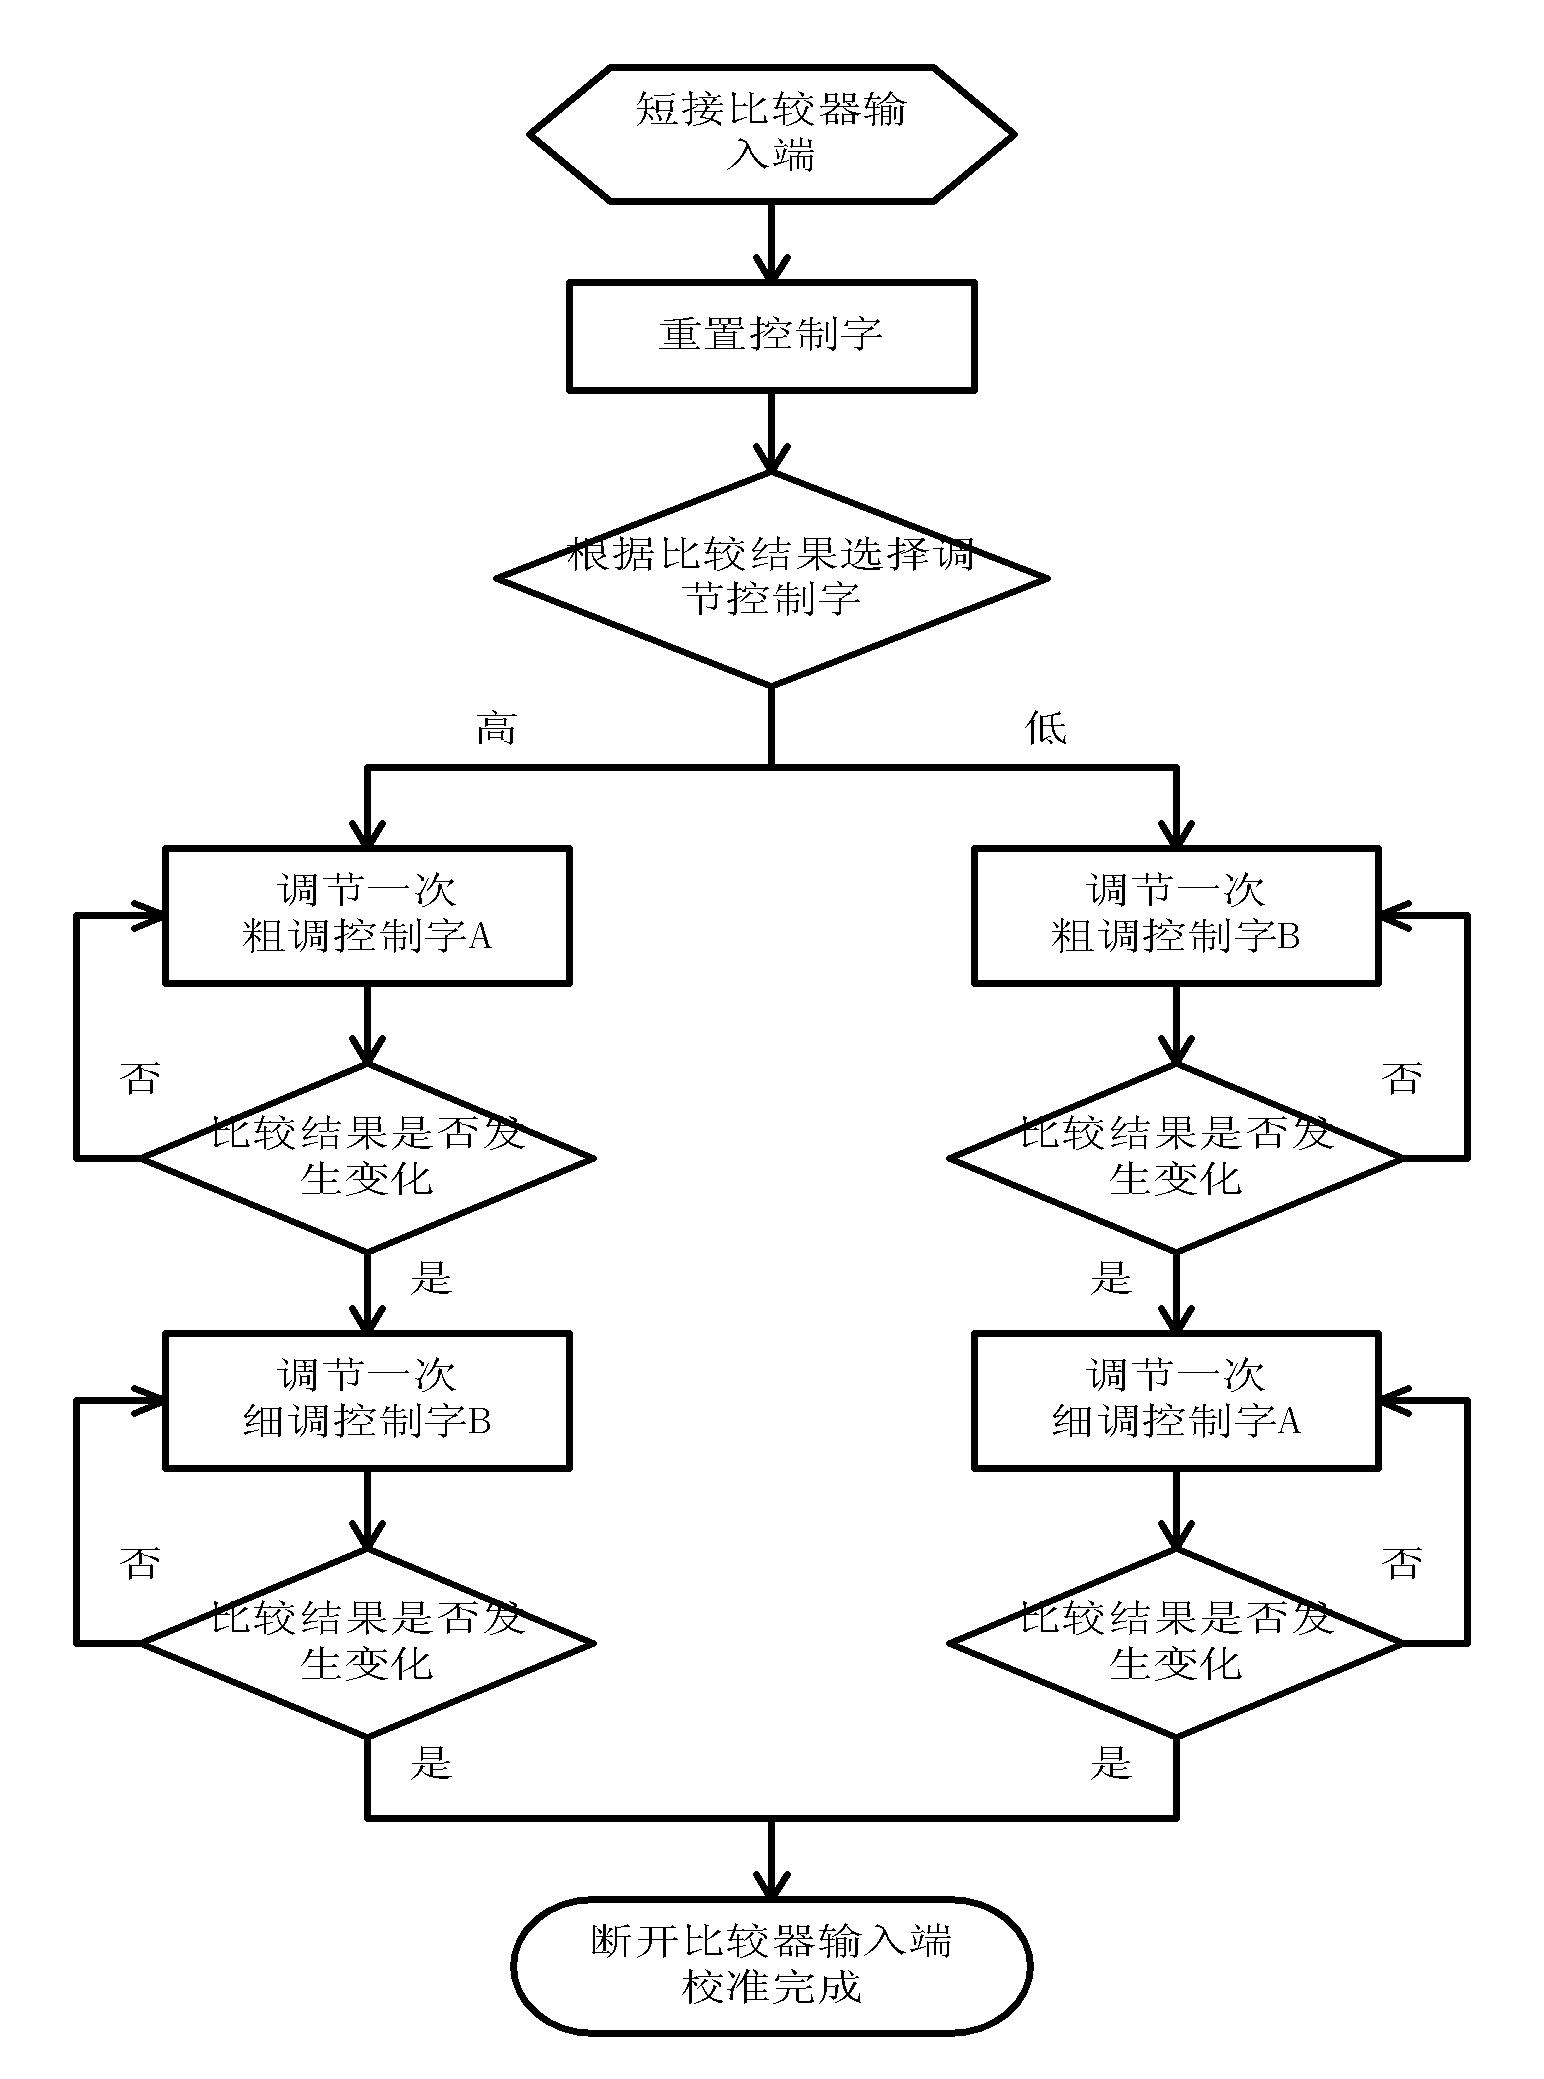 Threshold value offset calibration method applied to time domain comparator